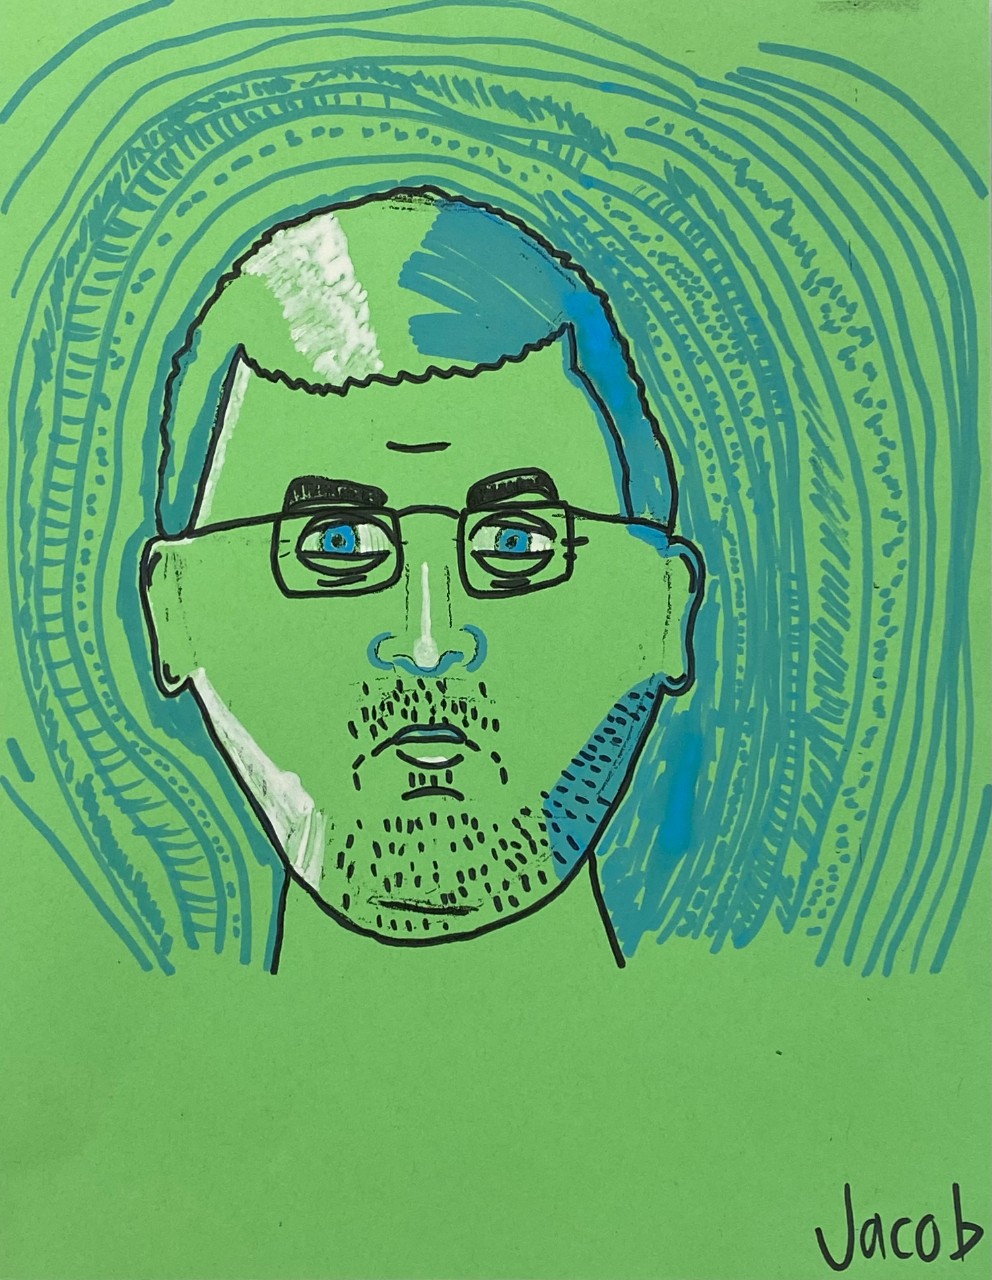 A green background features a black line drawing with blue and white highlights. It shows the face of a young man with chin and mustache stubble. He is wearing a serious expression and rectangular glasses and has thick eyebrows and blue eyes. His face is surrounded by expanding blue lines that hint at ripples of air or energy